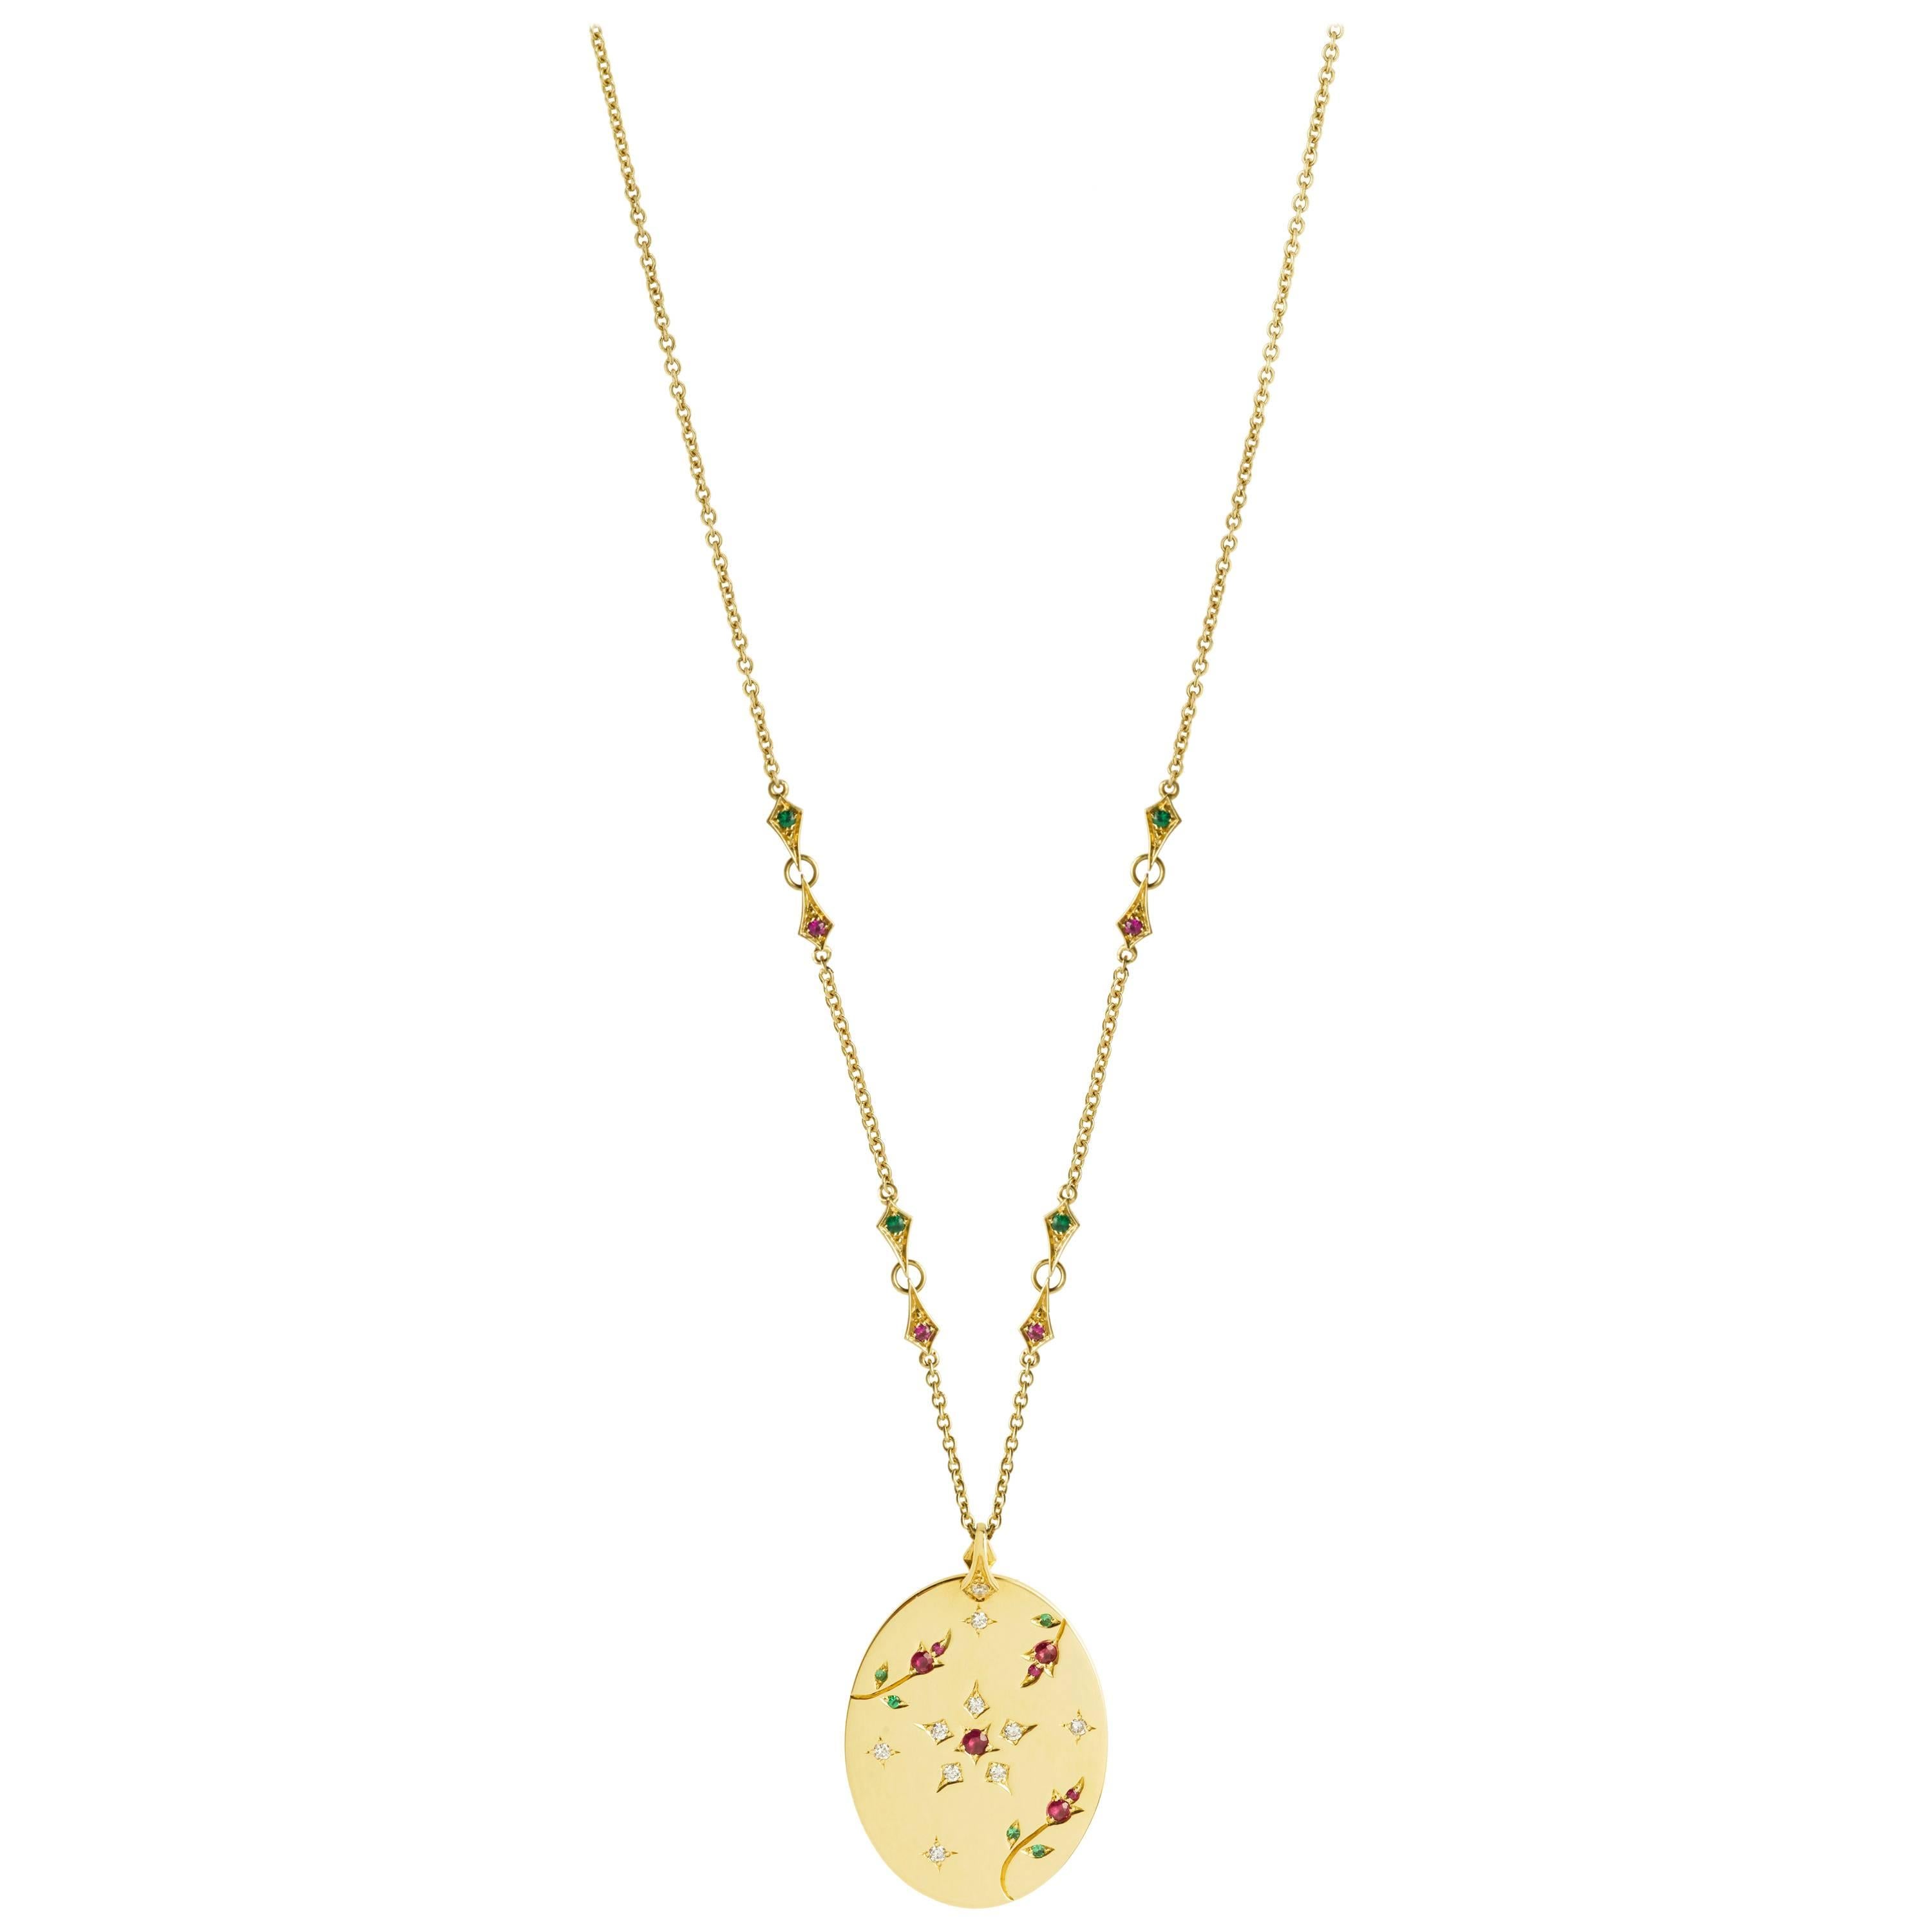 Yvonne Leon's Necklace in 18K Yellow Gold with Diamonds, Ruby, and Tsavorites